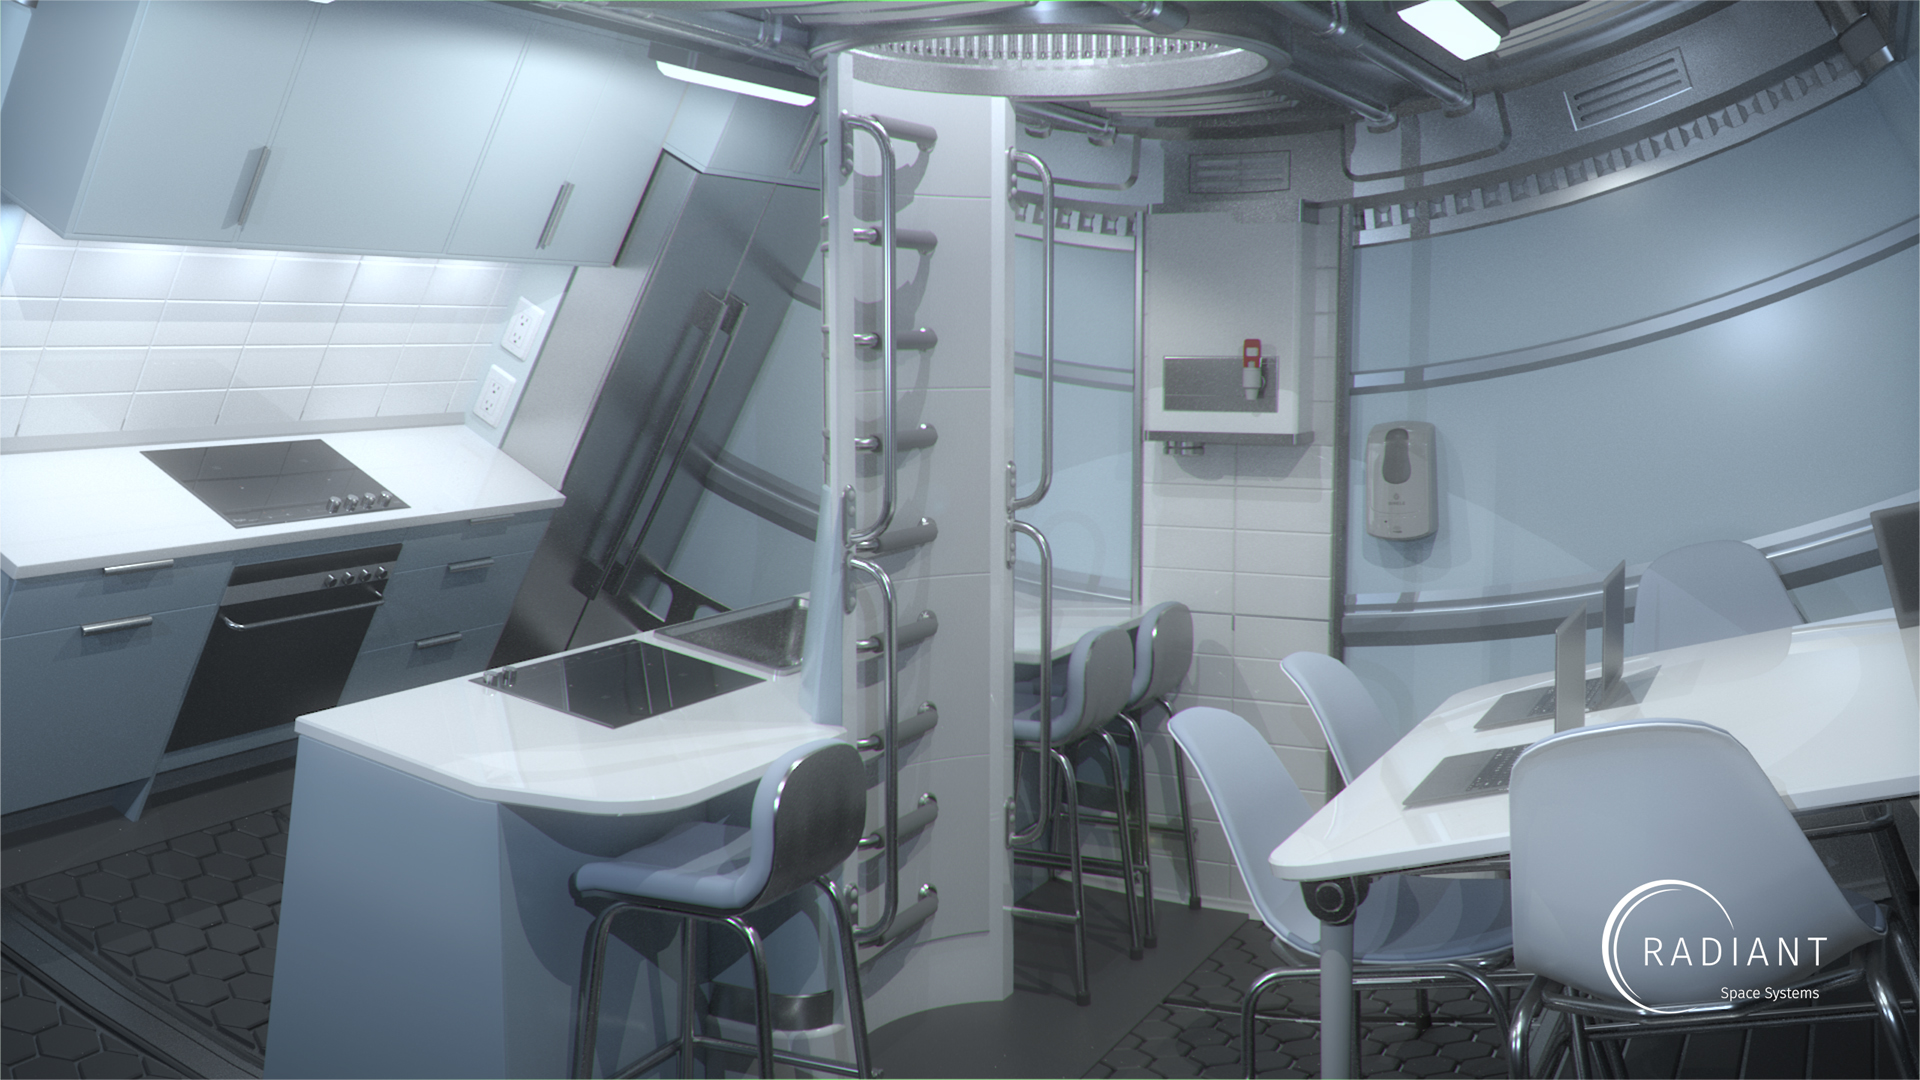 Render of the kitchen and dining area on the interior of Earthshine-Mini.